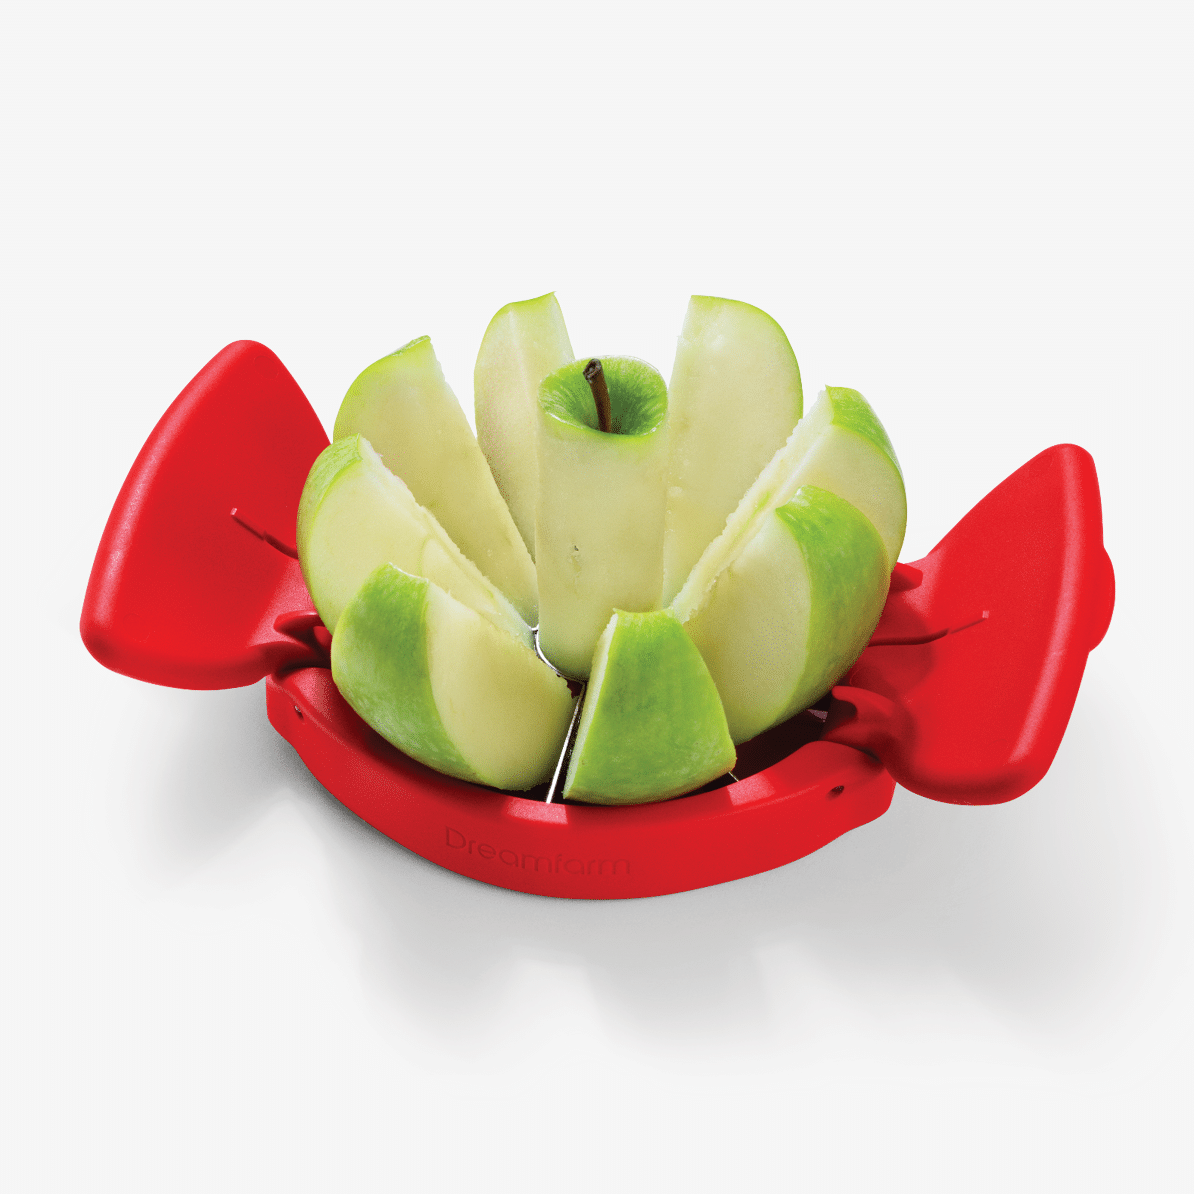 Flapple – the ultra-sharp apple slicer and corer that folds flat for easy storage. Its raised handles fold down for a compact, space-saving solution. The auto-aligning base allows for complete cuts without a cutting board, and when folded, the handles lock together to cover the blades for safe storage. With a wide diameter cutter, Flapple divides apples of all sizes into 8 equal pieces while efficiently removing the core. 